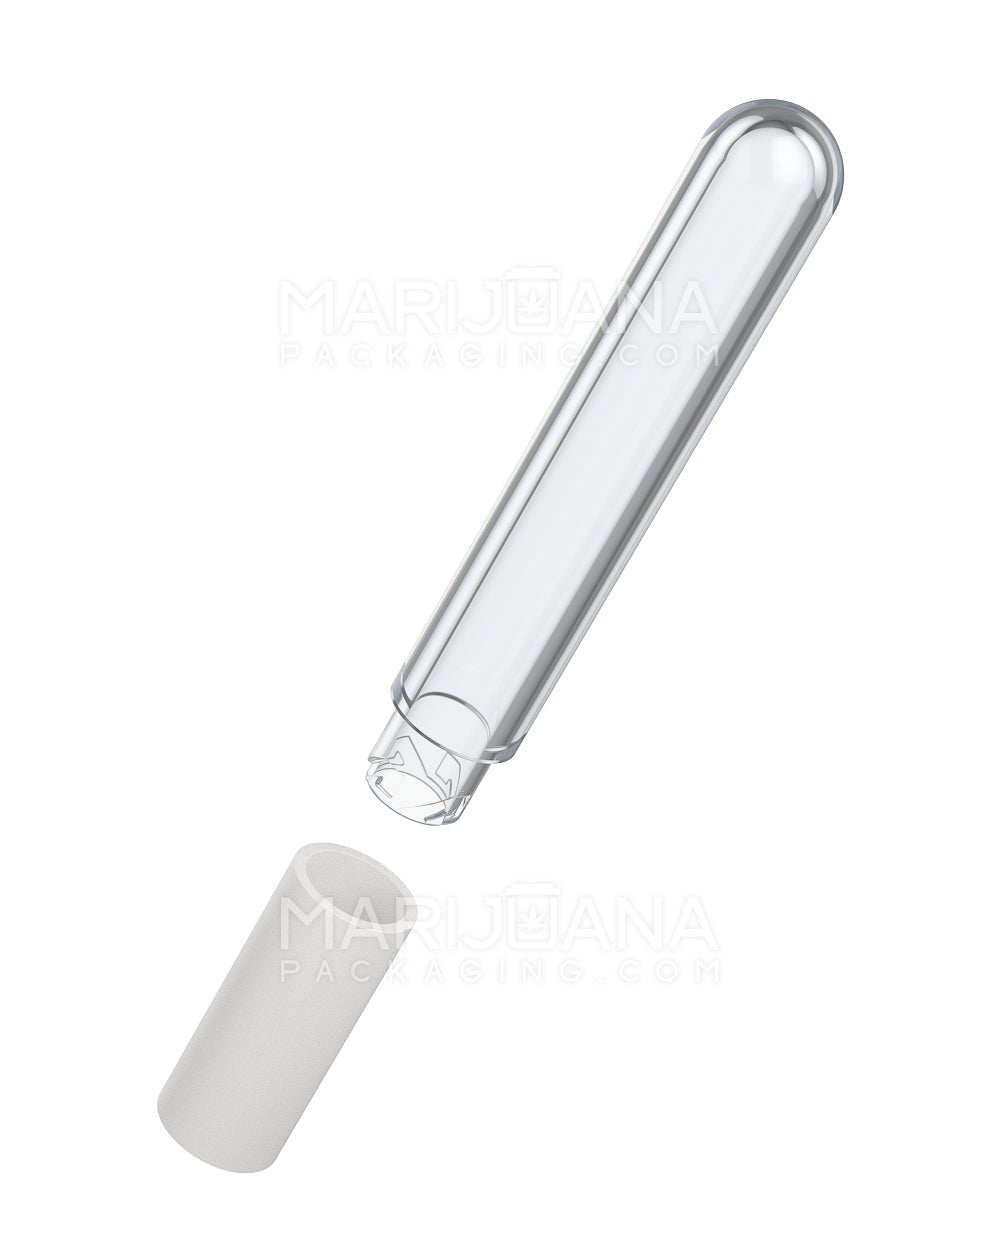 POLLEN GEAR | Transparent Pre-Roll & Vaporizer Tall Round Plastic Slim Tubes | 109mm - Clear - 1000 Count - 6